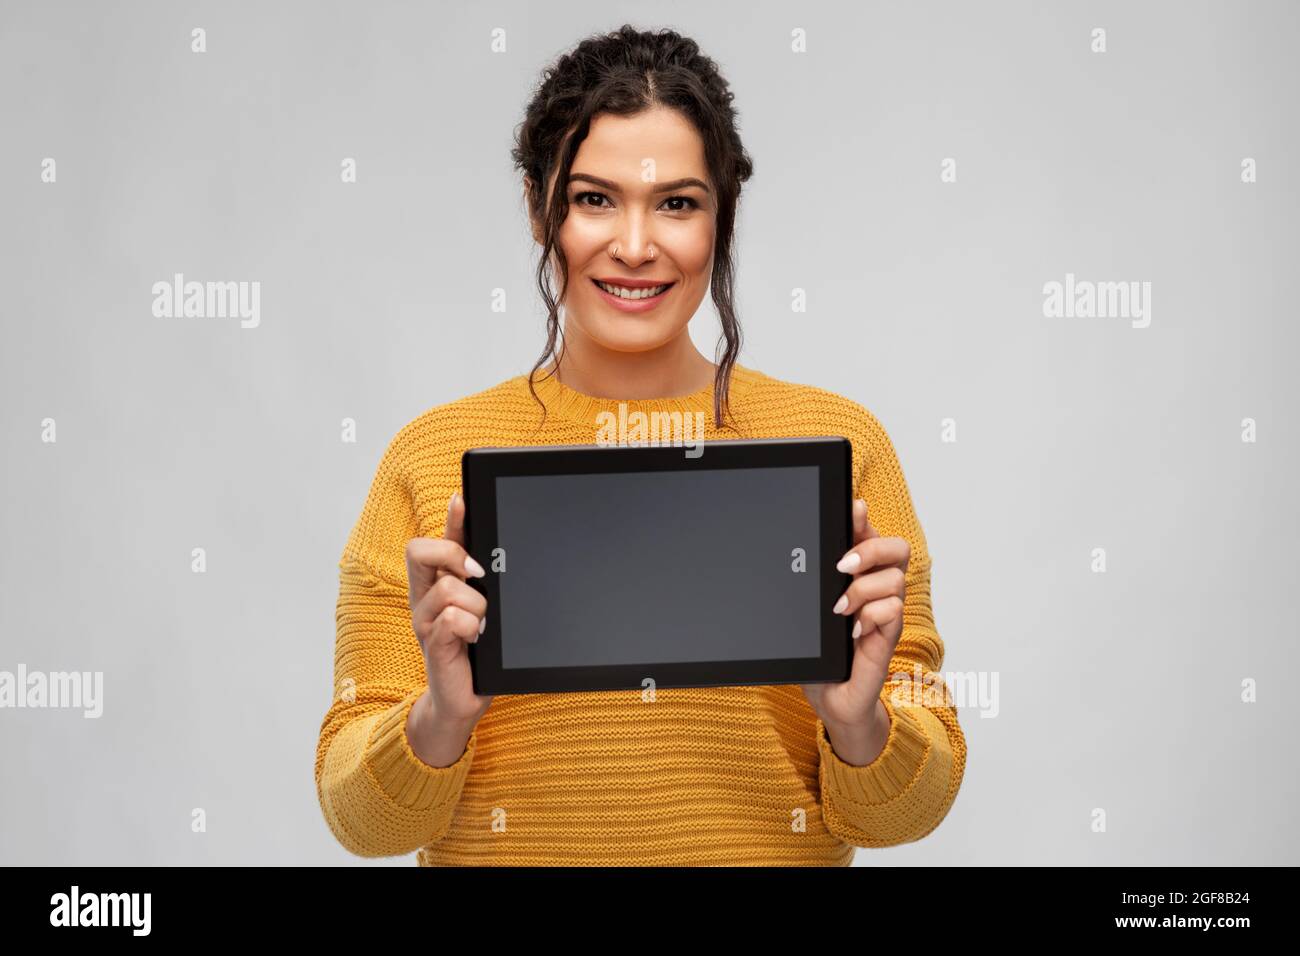 happy young woman showing tablet pc computer Stock Photo